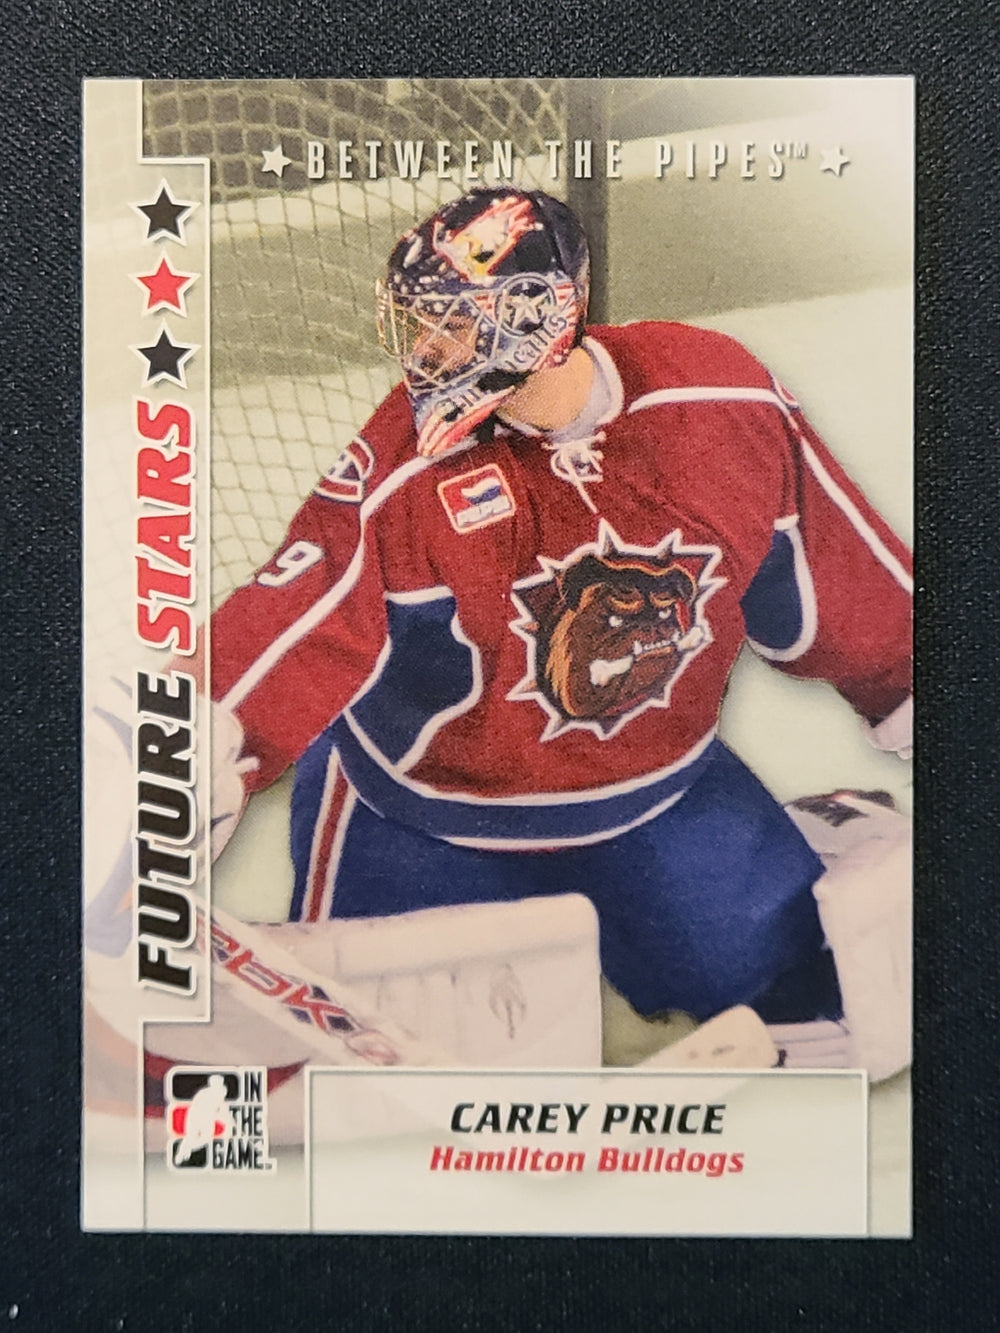 2007-08 ITG Between the Pipes CHL #7 Carey Price Hamilton Bulldogs